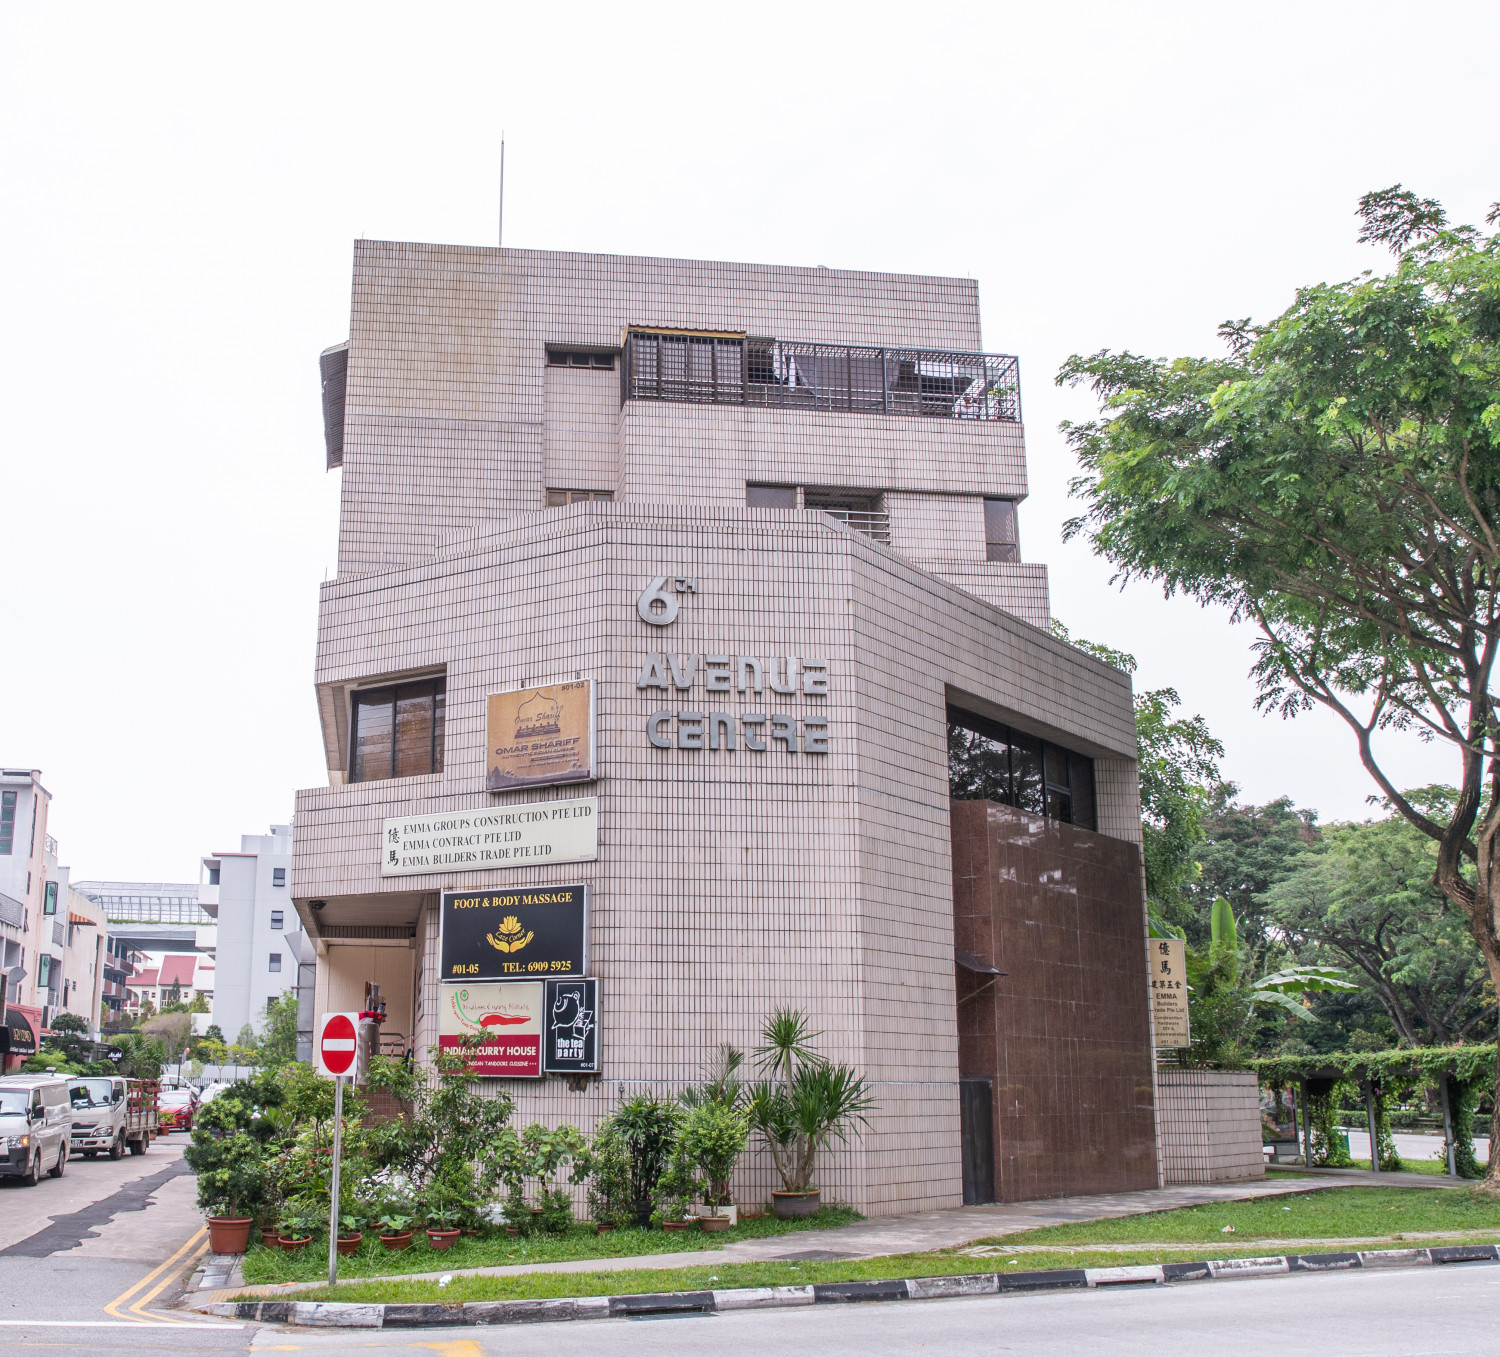 Sixth Avenue Centre in Bukit Timah relaunched for collective sale at $85 mil